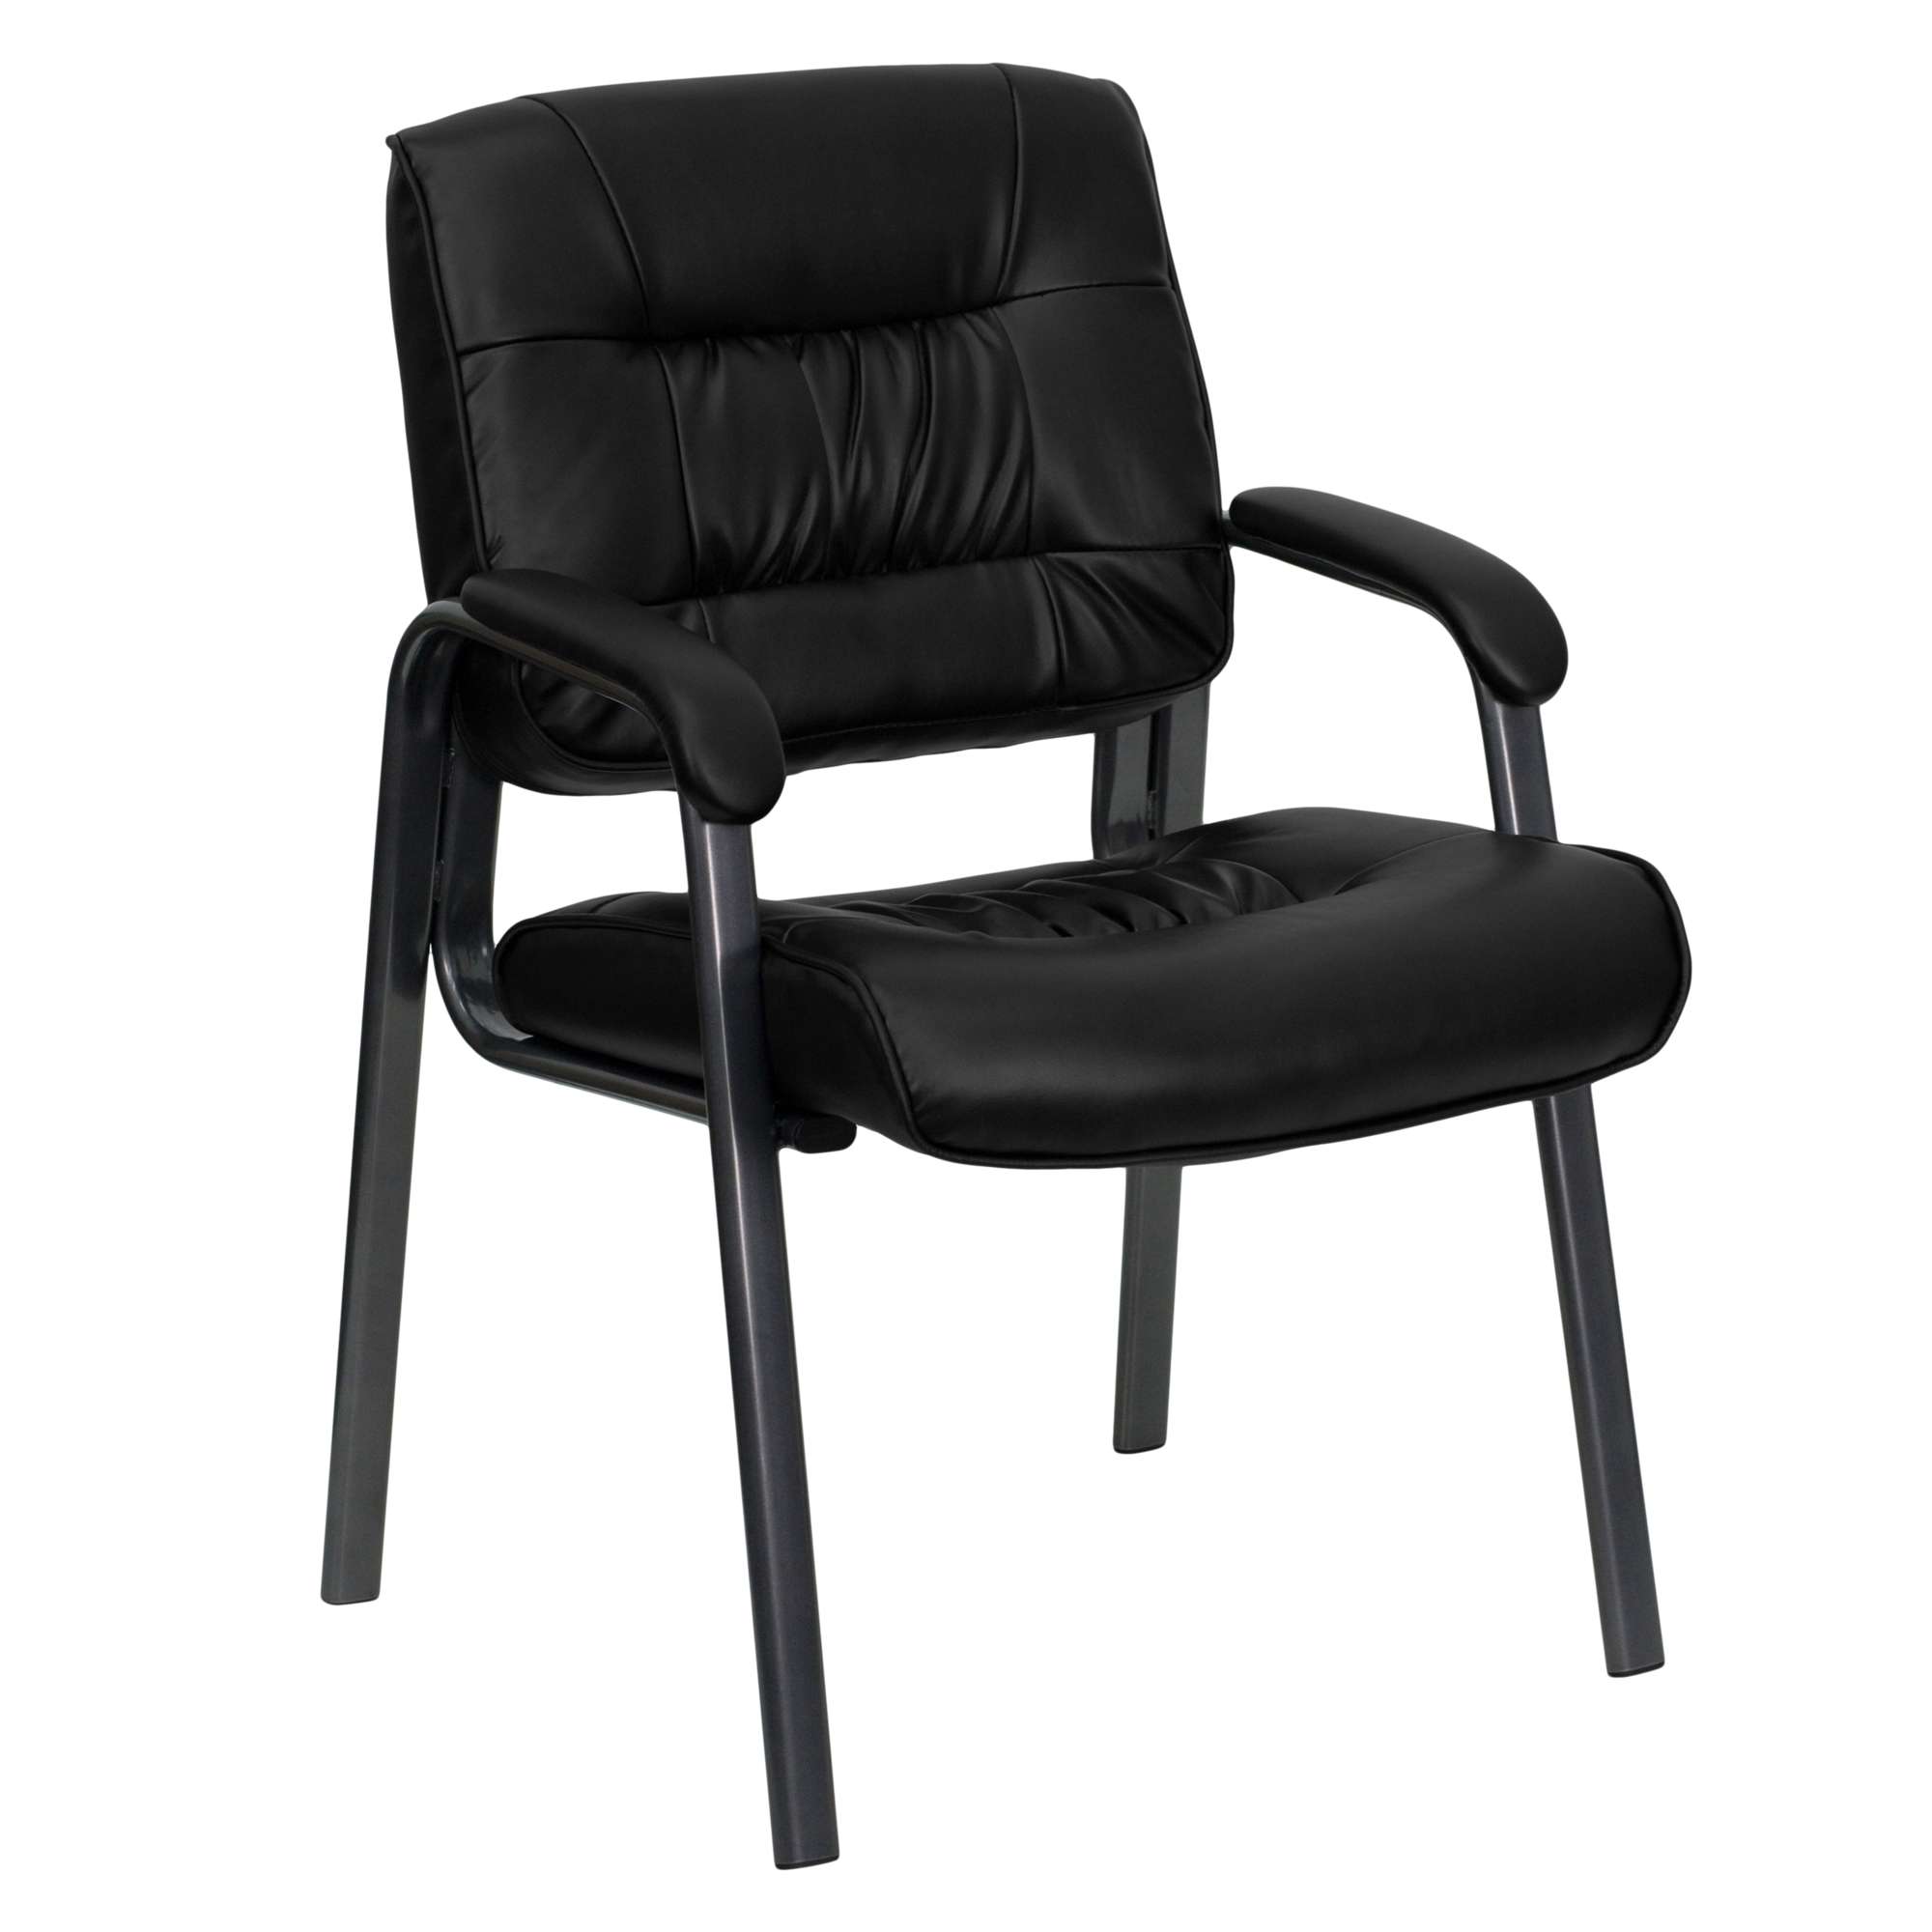 Flash Furniture, Black LeatherSoft Reception Chair w/Gray Frame, Primary Color Black, Included (qty.) 1, Model BT1404BKGY